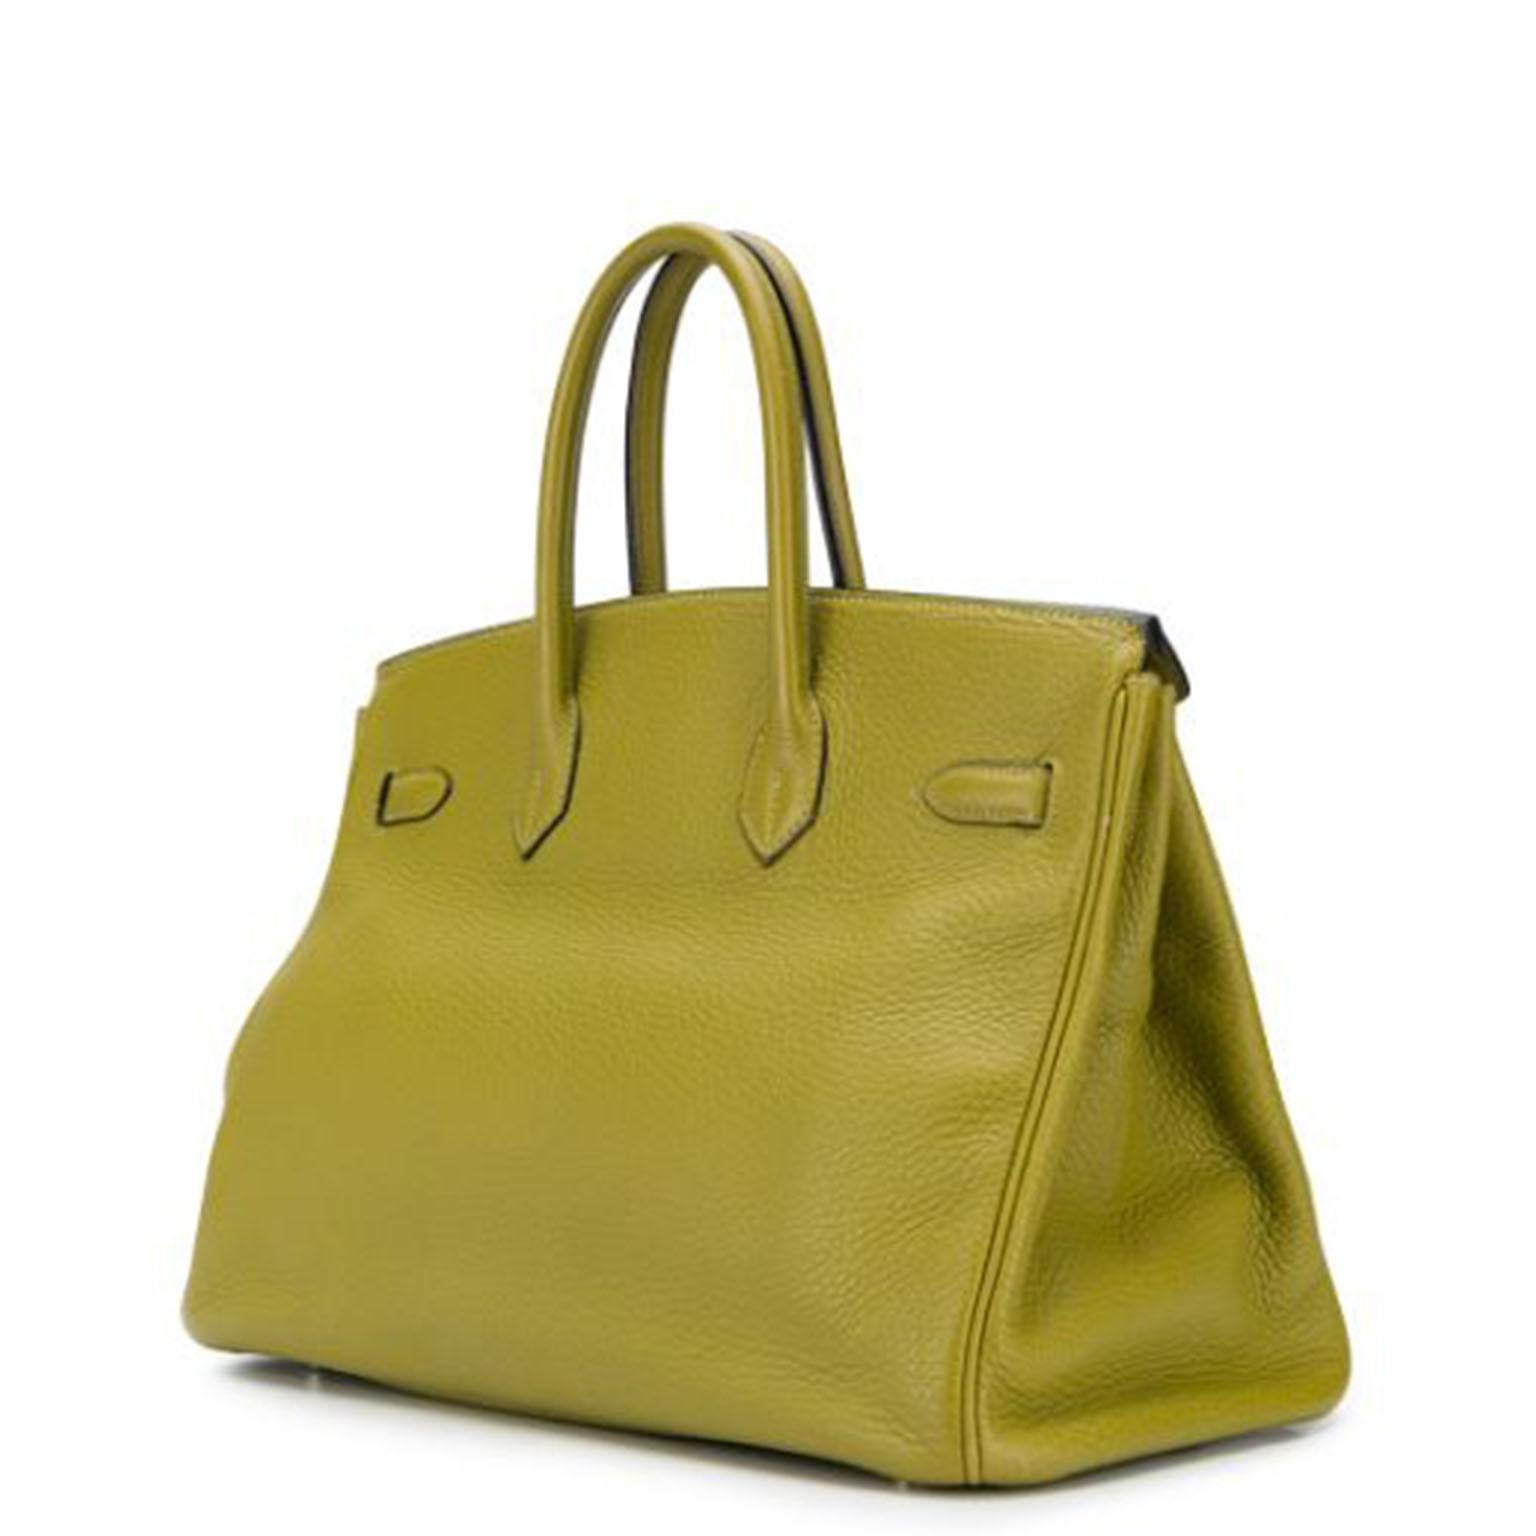 A Birkin bag - it's a thing. Constructed from Togo leather, this jaw-dropping Birkin 35 tote bag from Hermès will bring life to any outfit whilst being able to hold all your essentials. Perfect. 

Colour: Vert Anis

Composition: 100% Togo